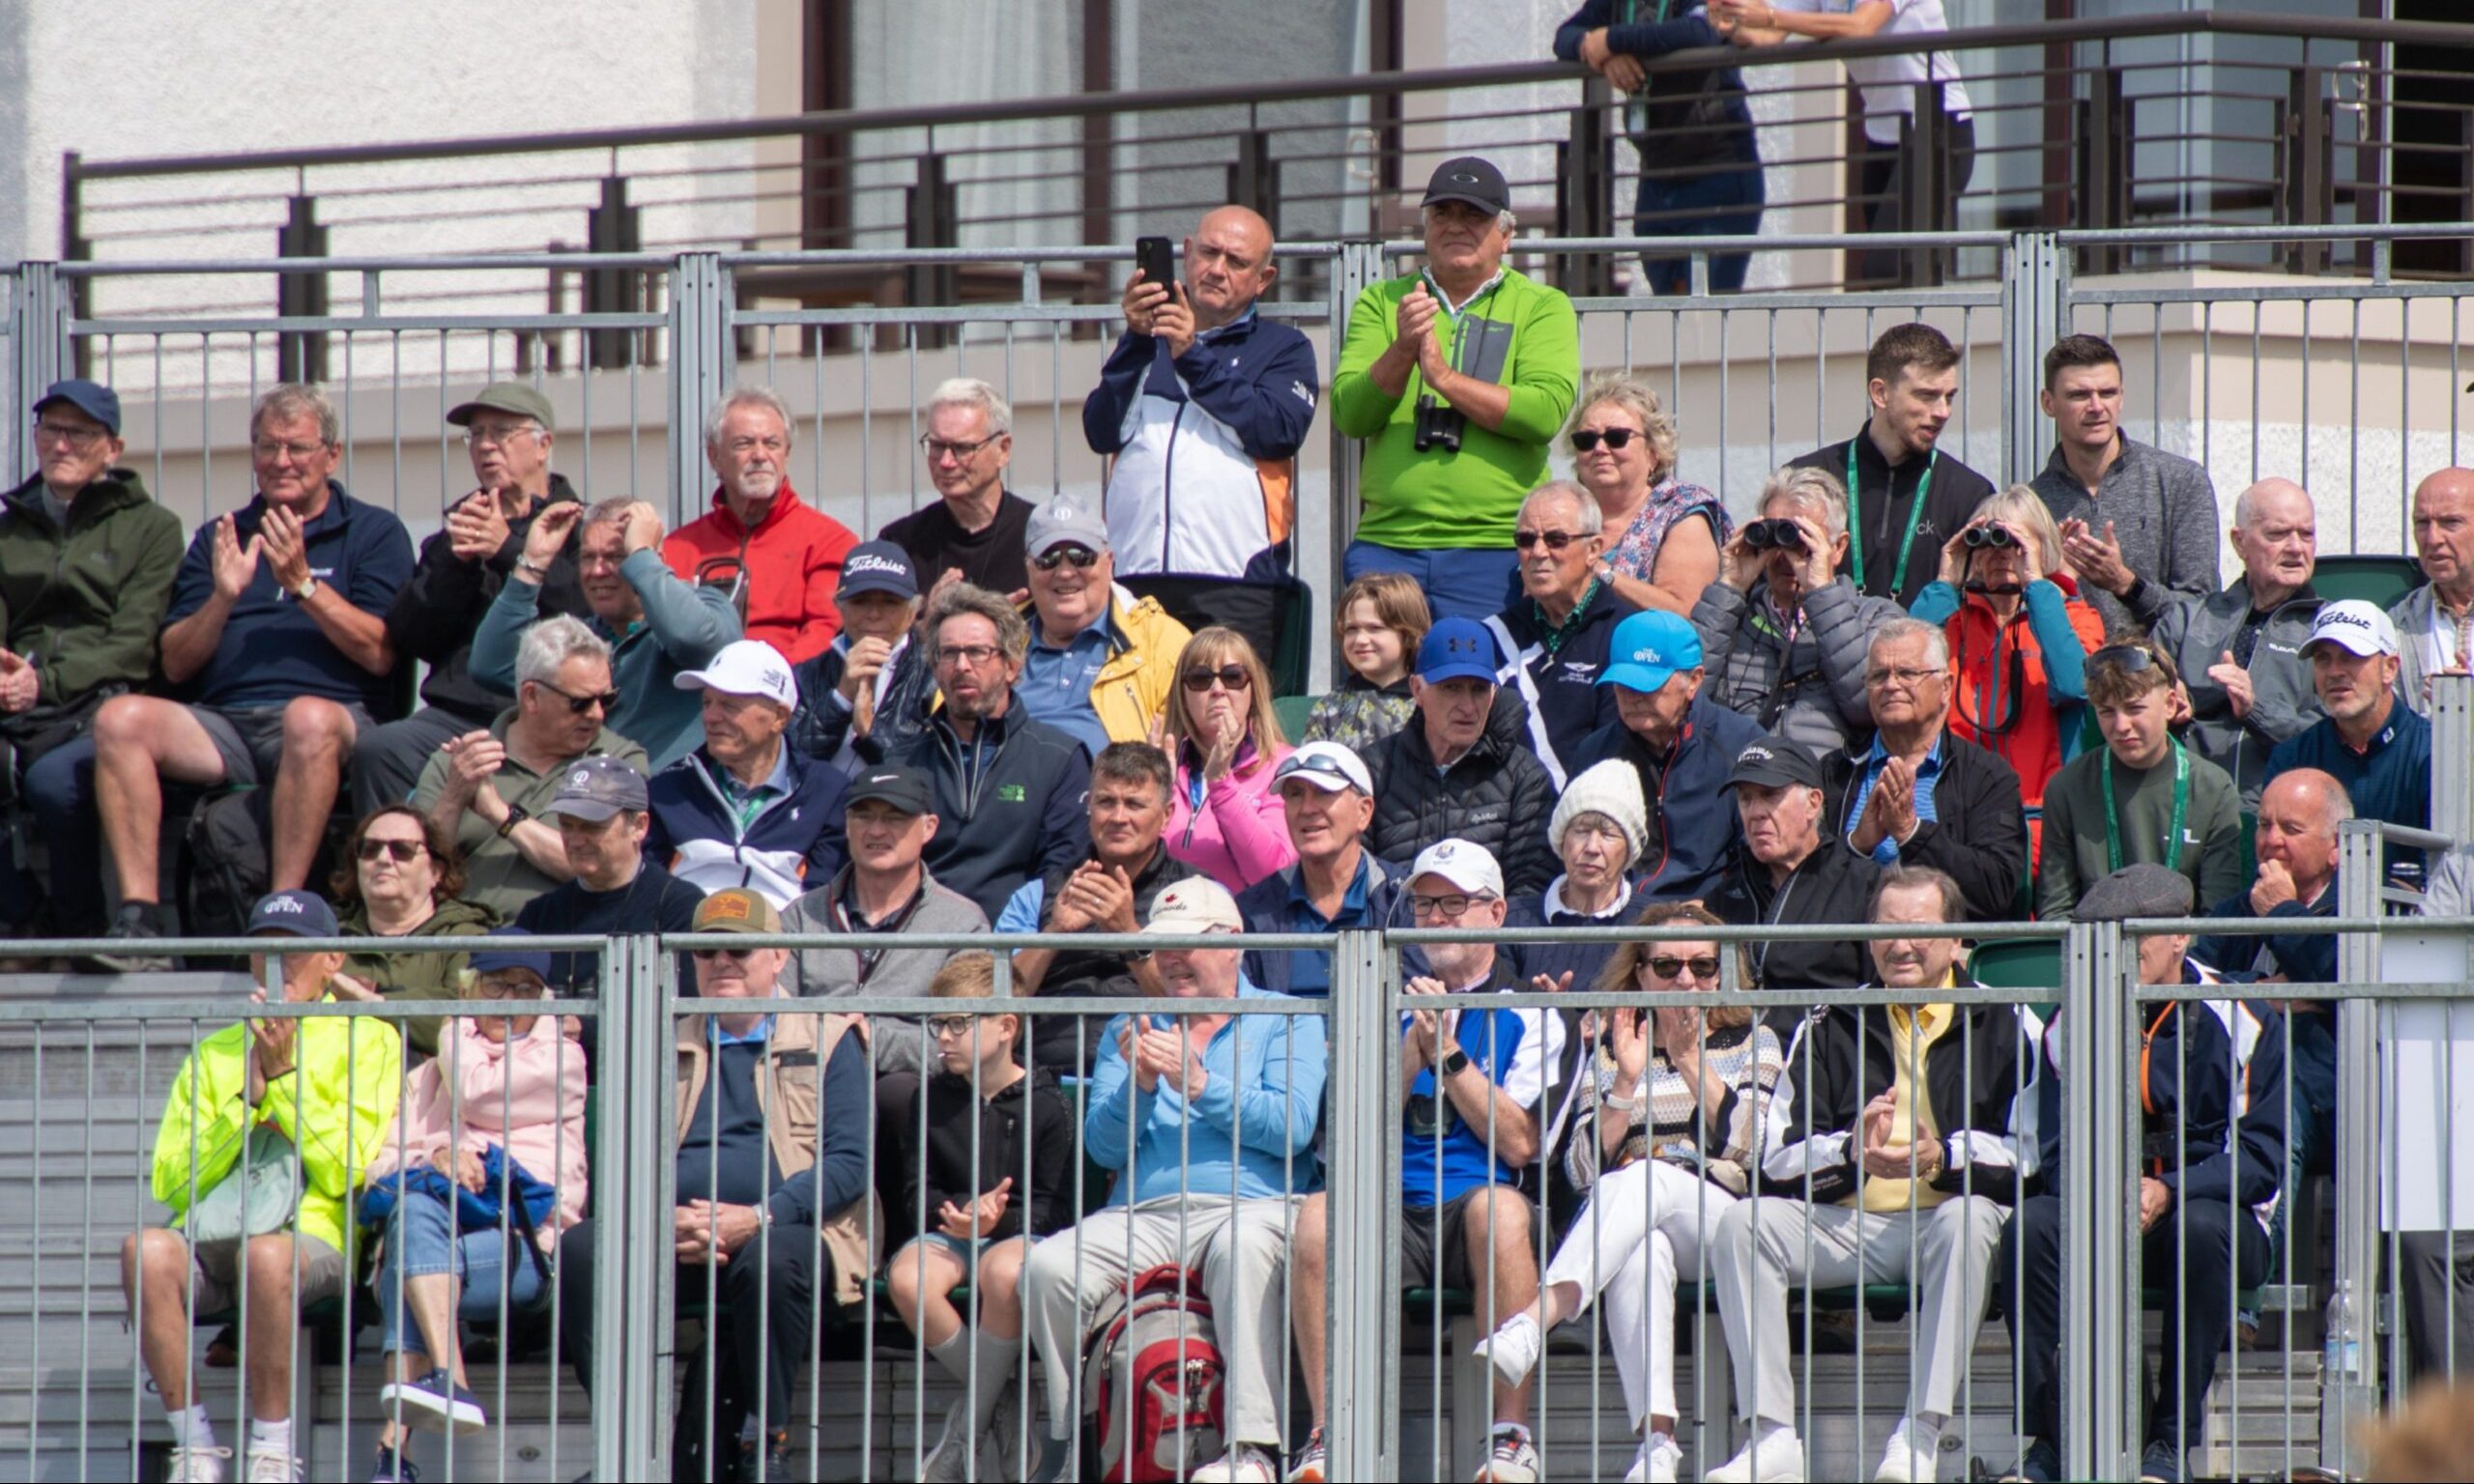 Grandstand above the 1st tee, Carnoustie Golf Links. Image: Kim Cessford / DC Thomson